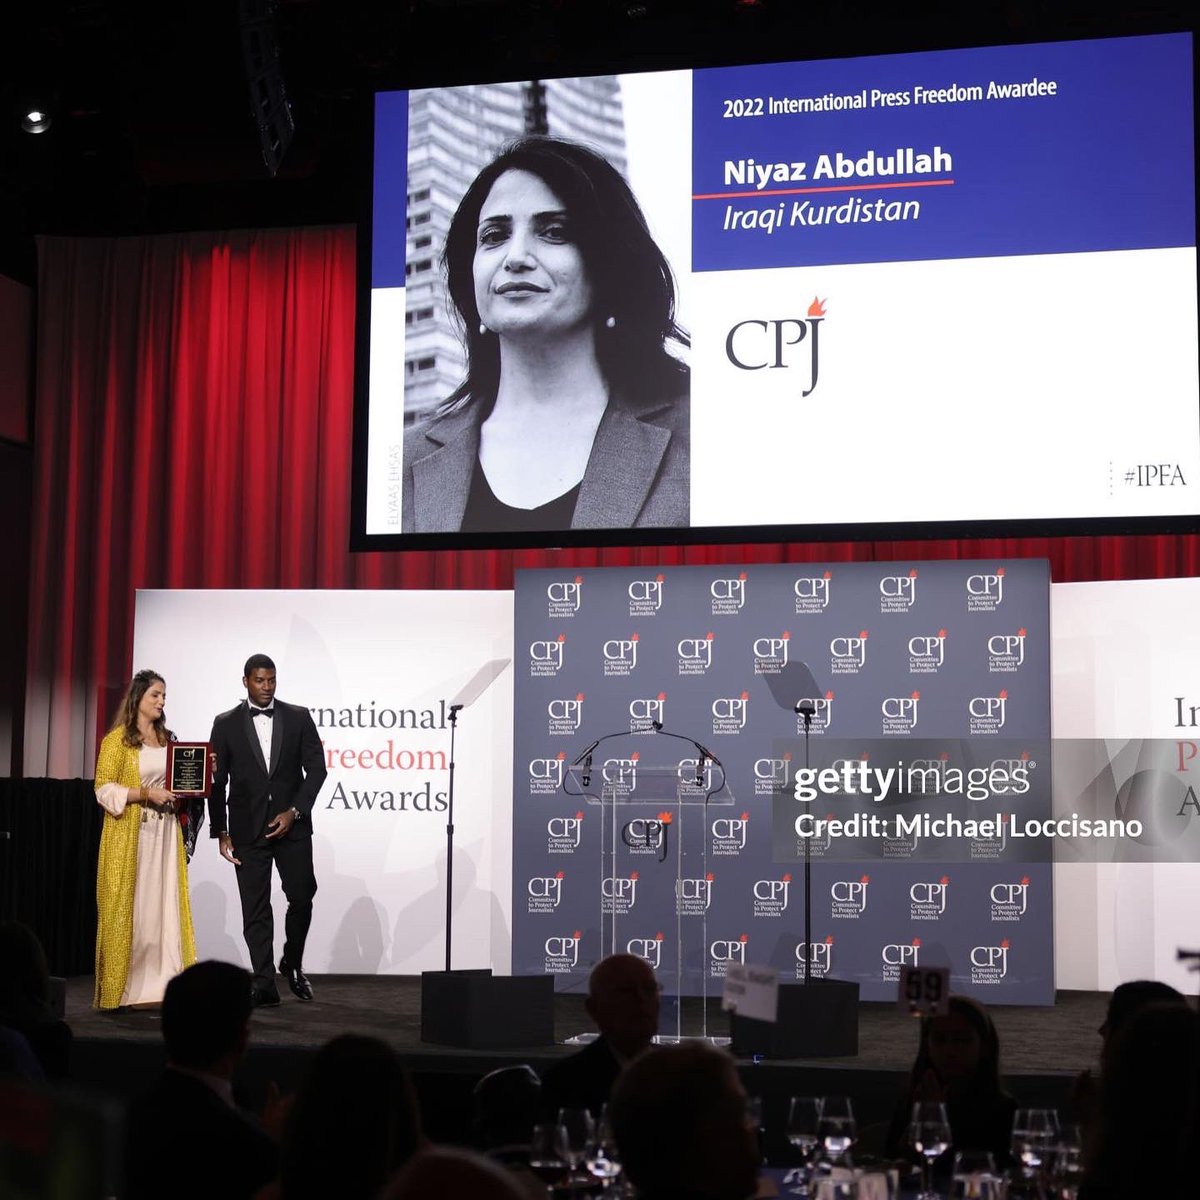 Read more about their incredible stories and why they’re deserving of this recognition from @pressfreedom —> cpj.org/awards/cpjs-20…